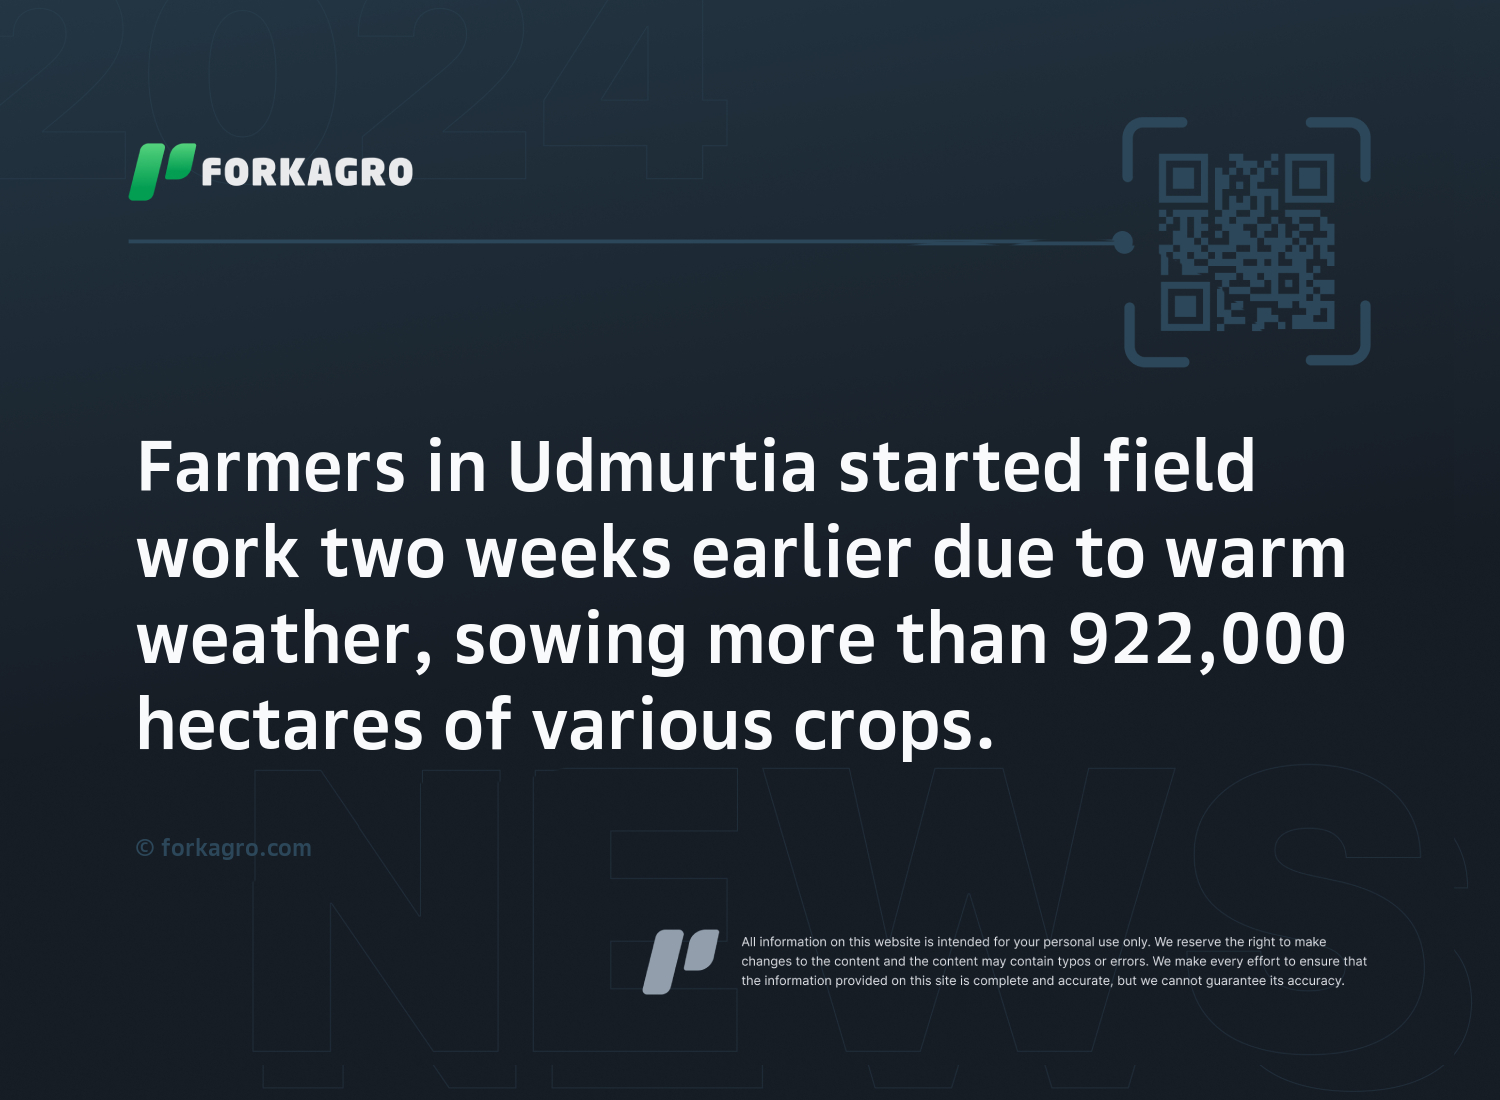 Farmers in Udmurtia started field work two weeks earlier due to warm weather, sowing more than 922,000 hectares of various crops.